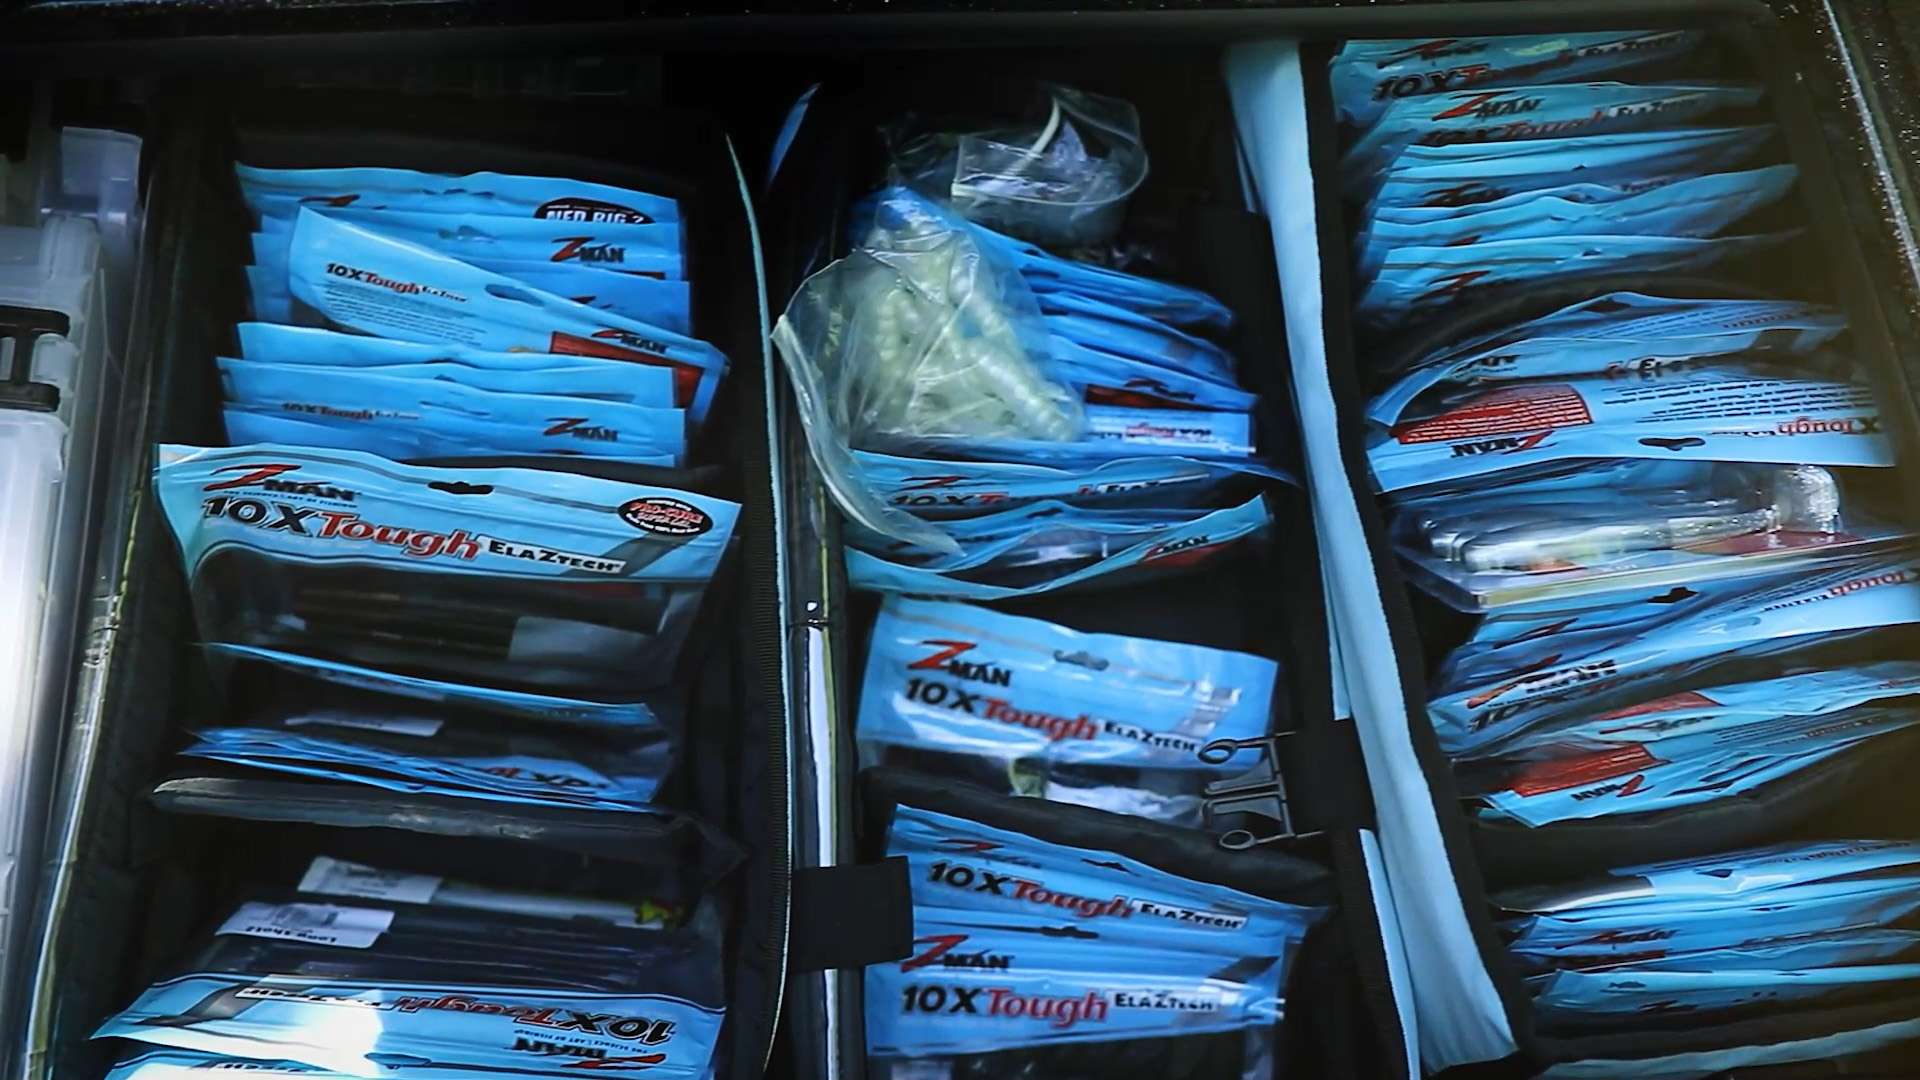 Slide back the lid and create an easy-to-access bait filing system within your boatâs storage compartments.